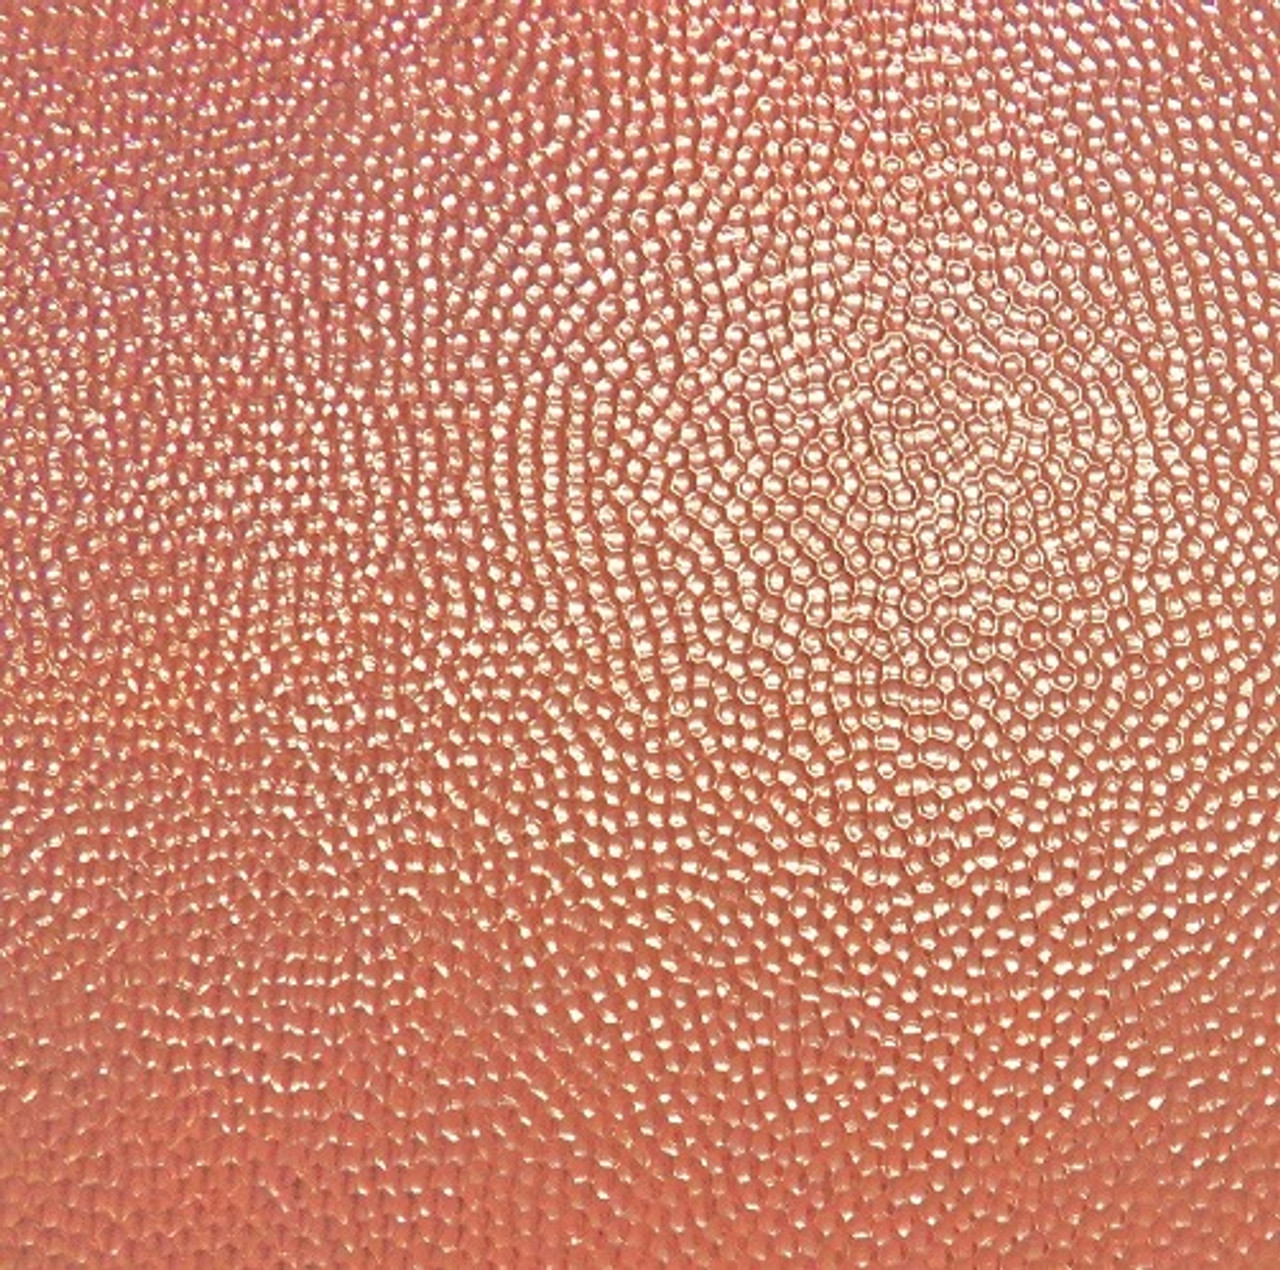 Potter USA - Fine Tools. Copper Sheet - Hammered Pattern 5 x 8